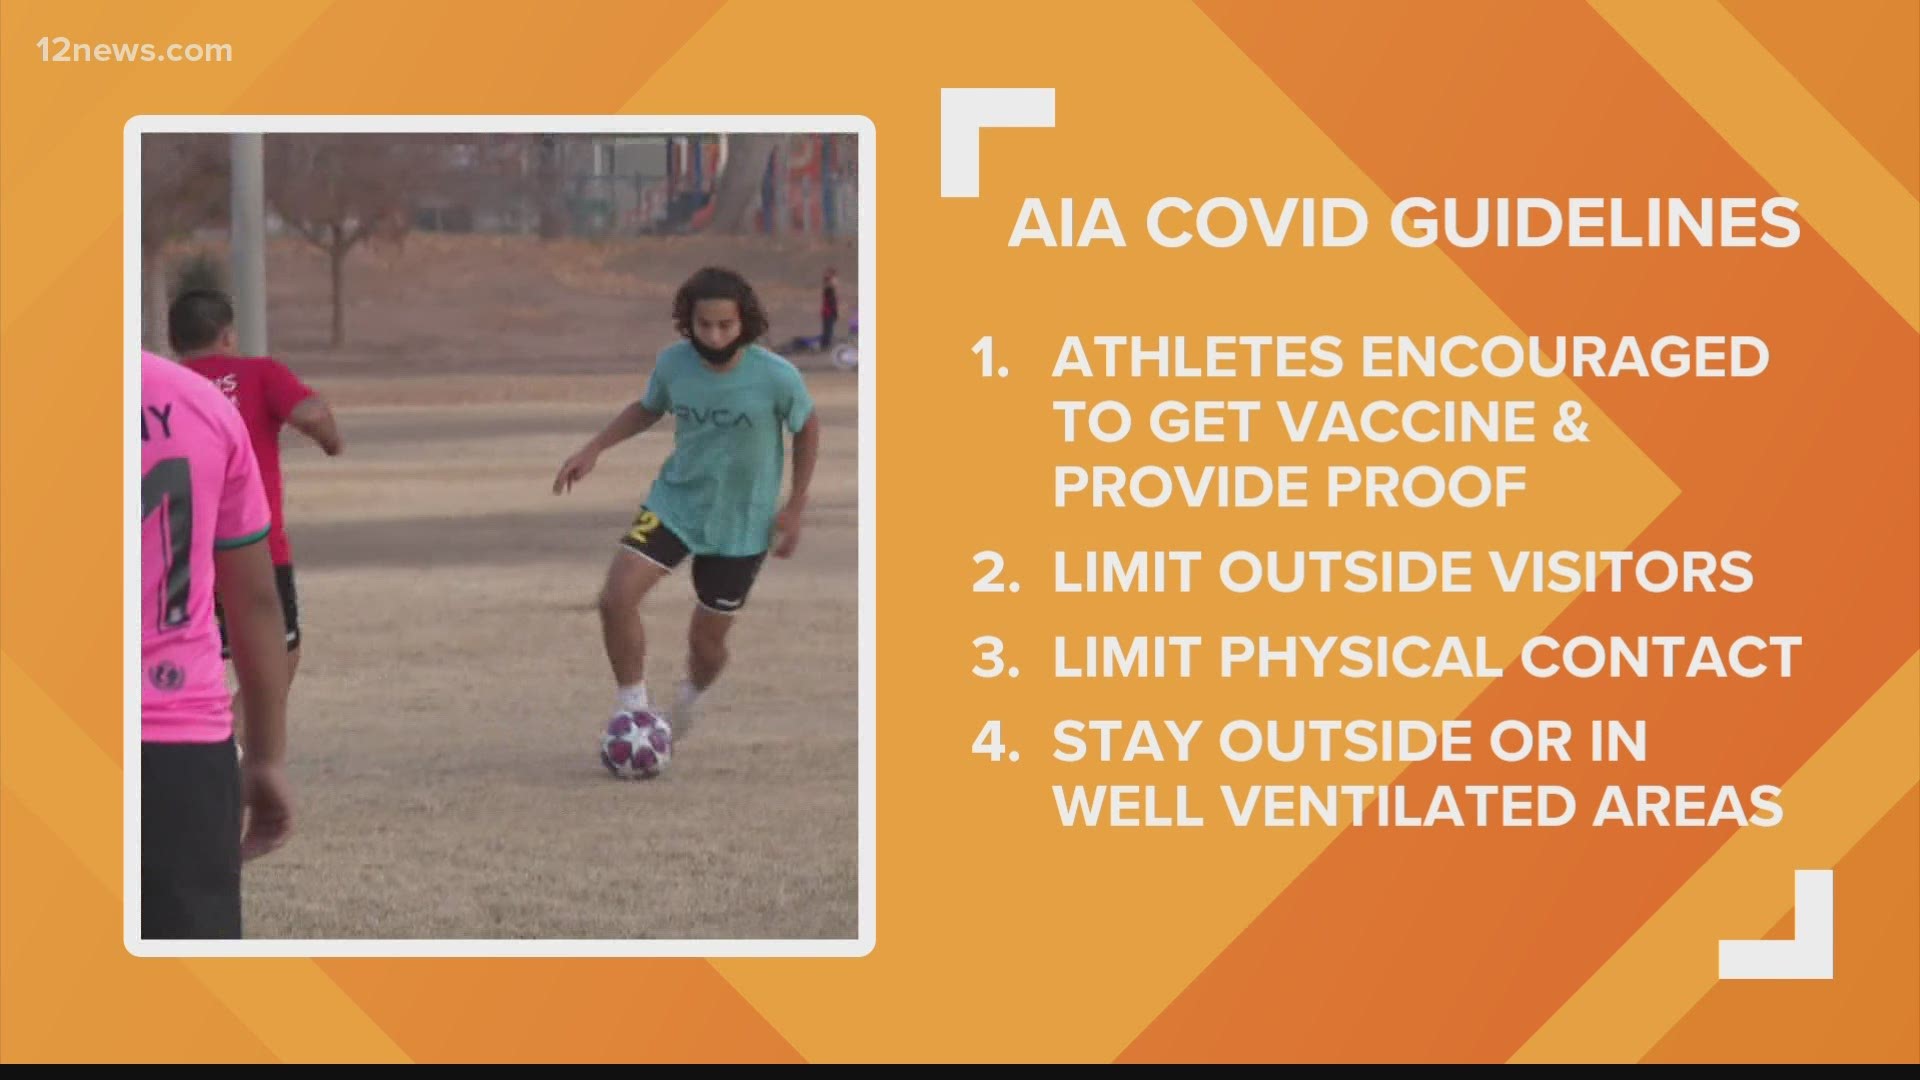 The AIA released new COVID-19 guidelines for the upcoming school year in Arizona. Will Pitts has the details.